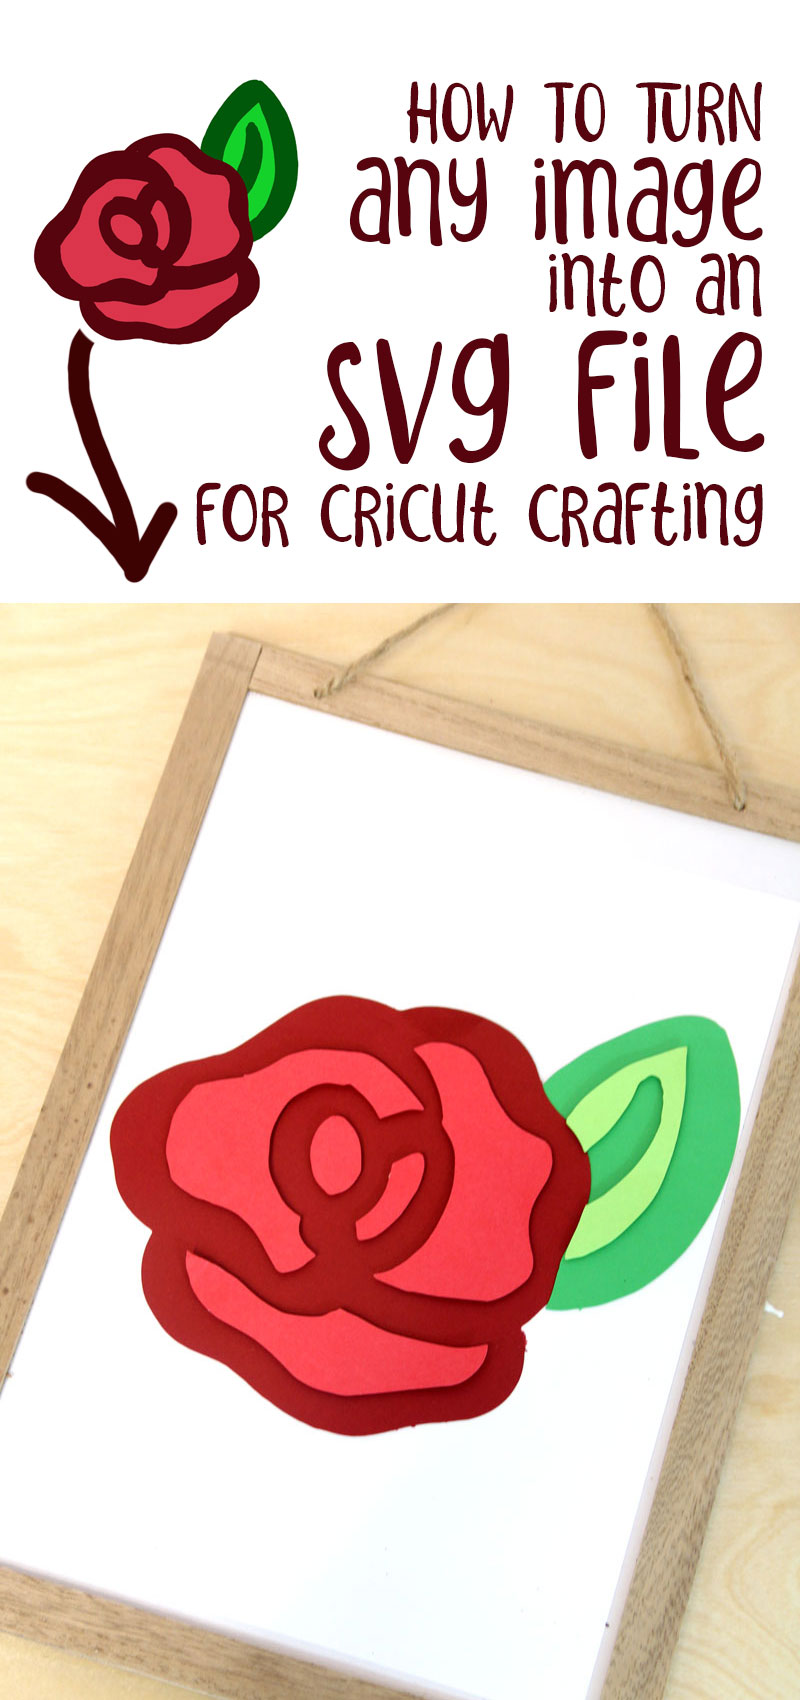 how to make an svg for cricut as shown with a rose image.